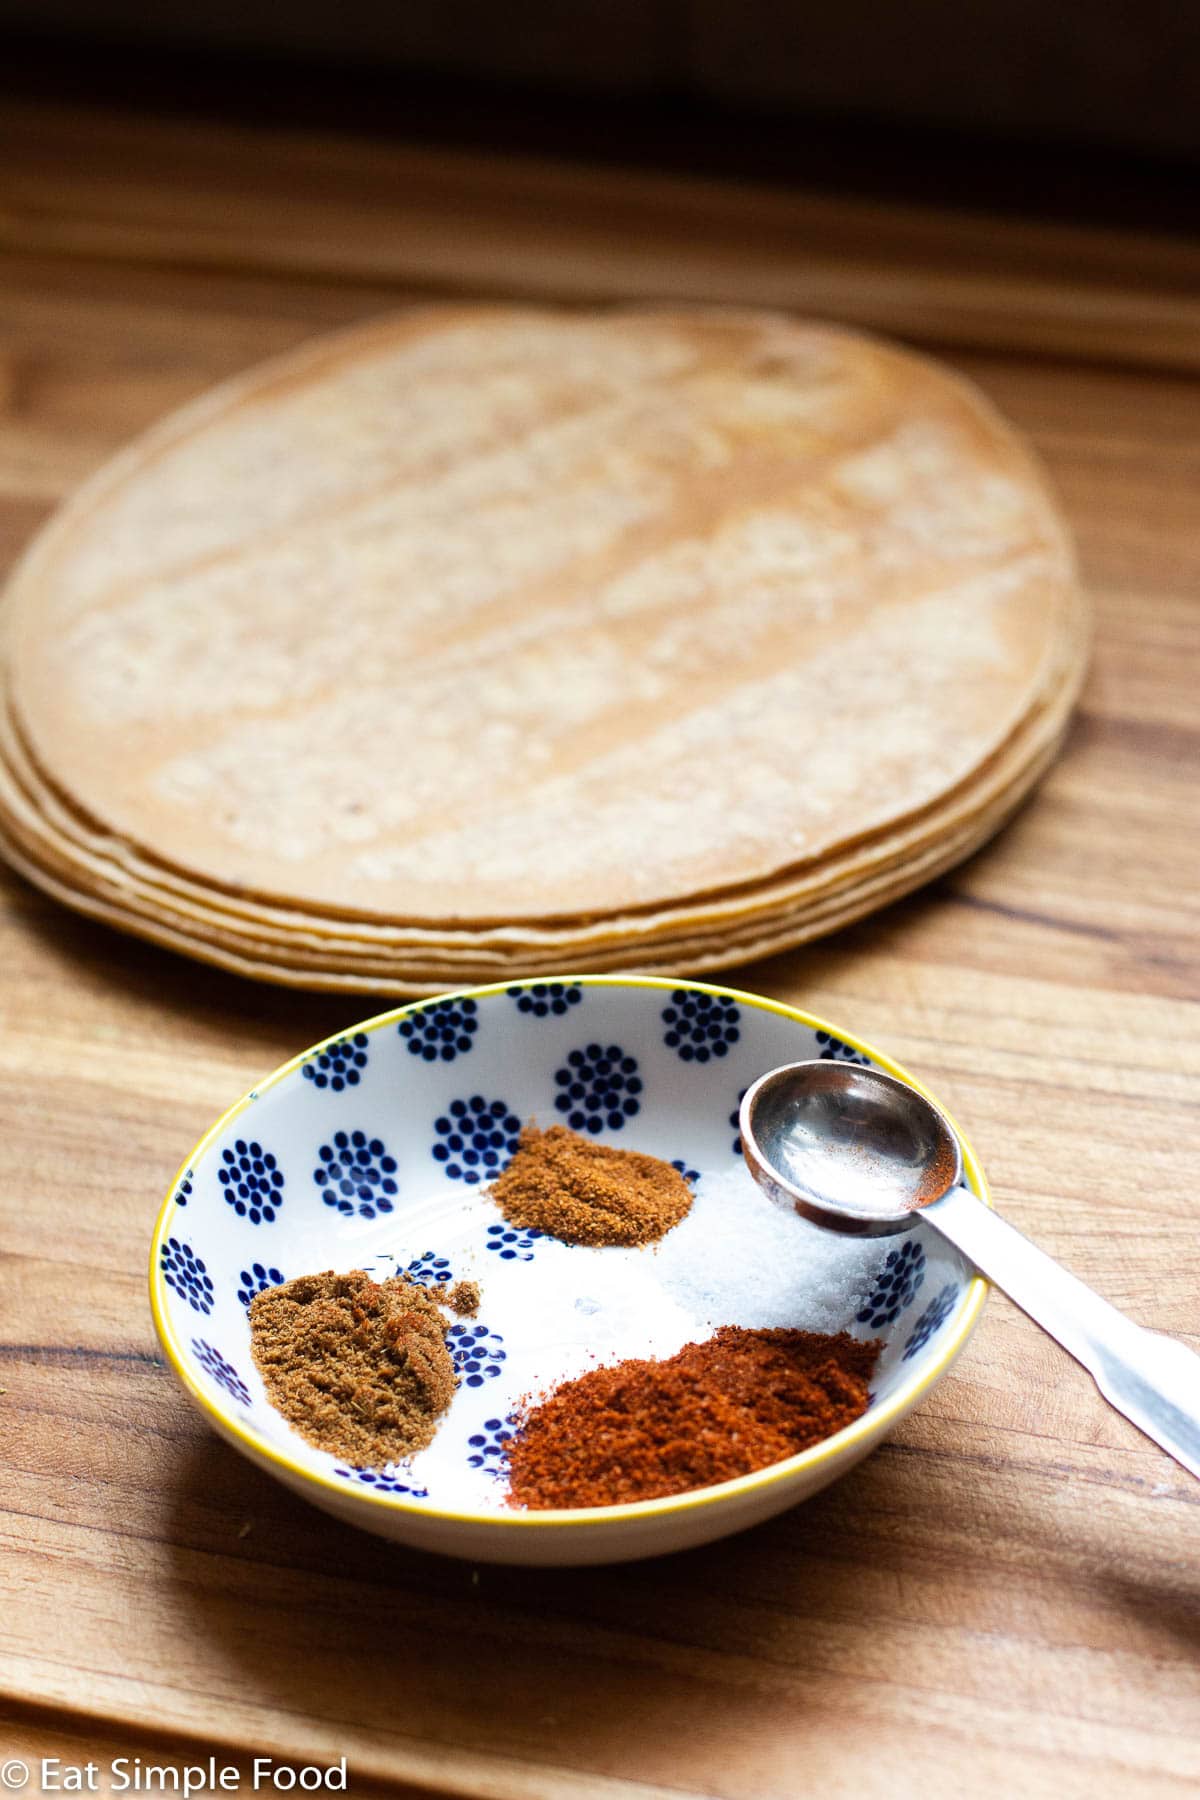 Raw uncut tortillas on a wood cutting board with a small bowl of red, brown, and yellow spices in the front.